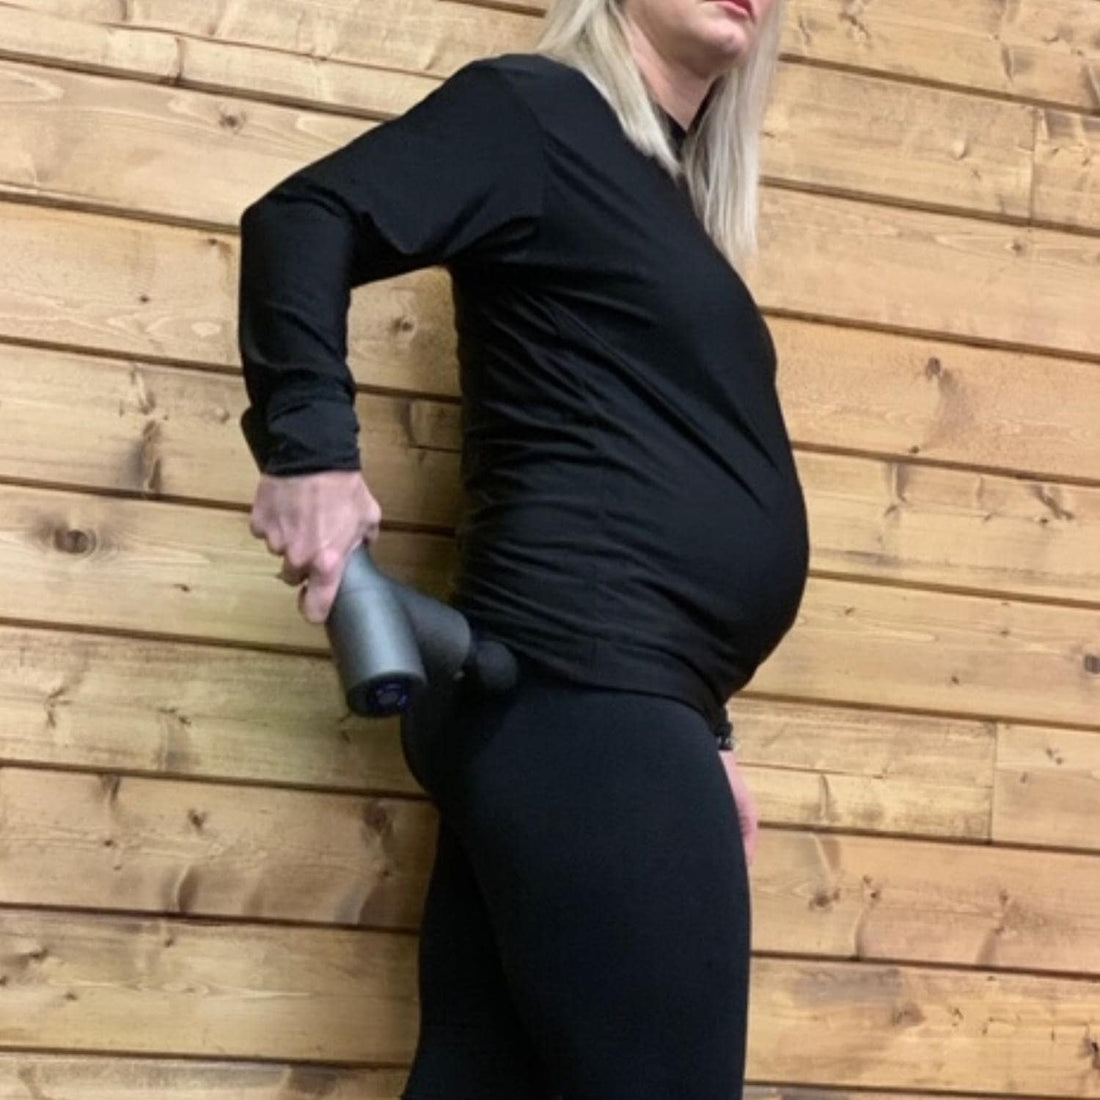 pregnant crossfit mom using percussion massager to relax image